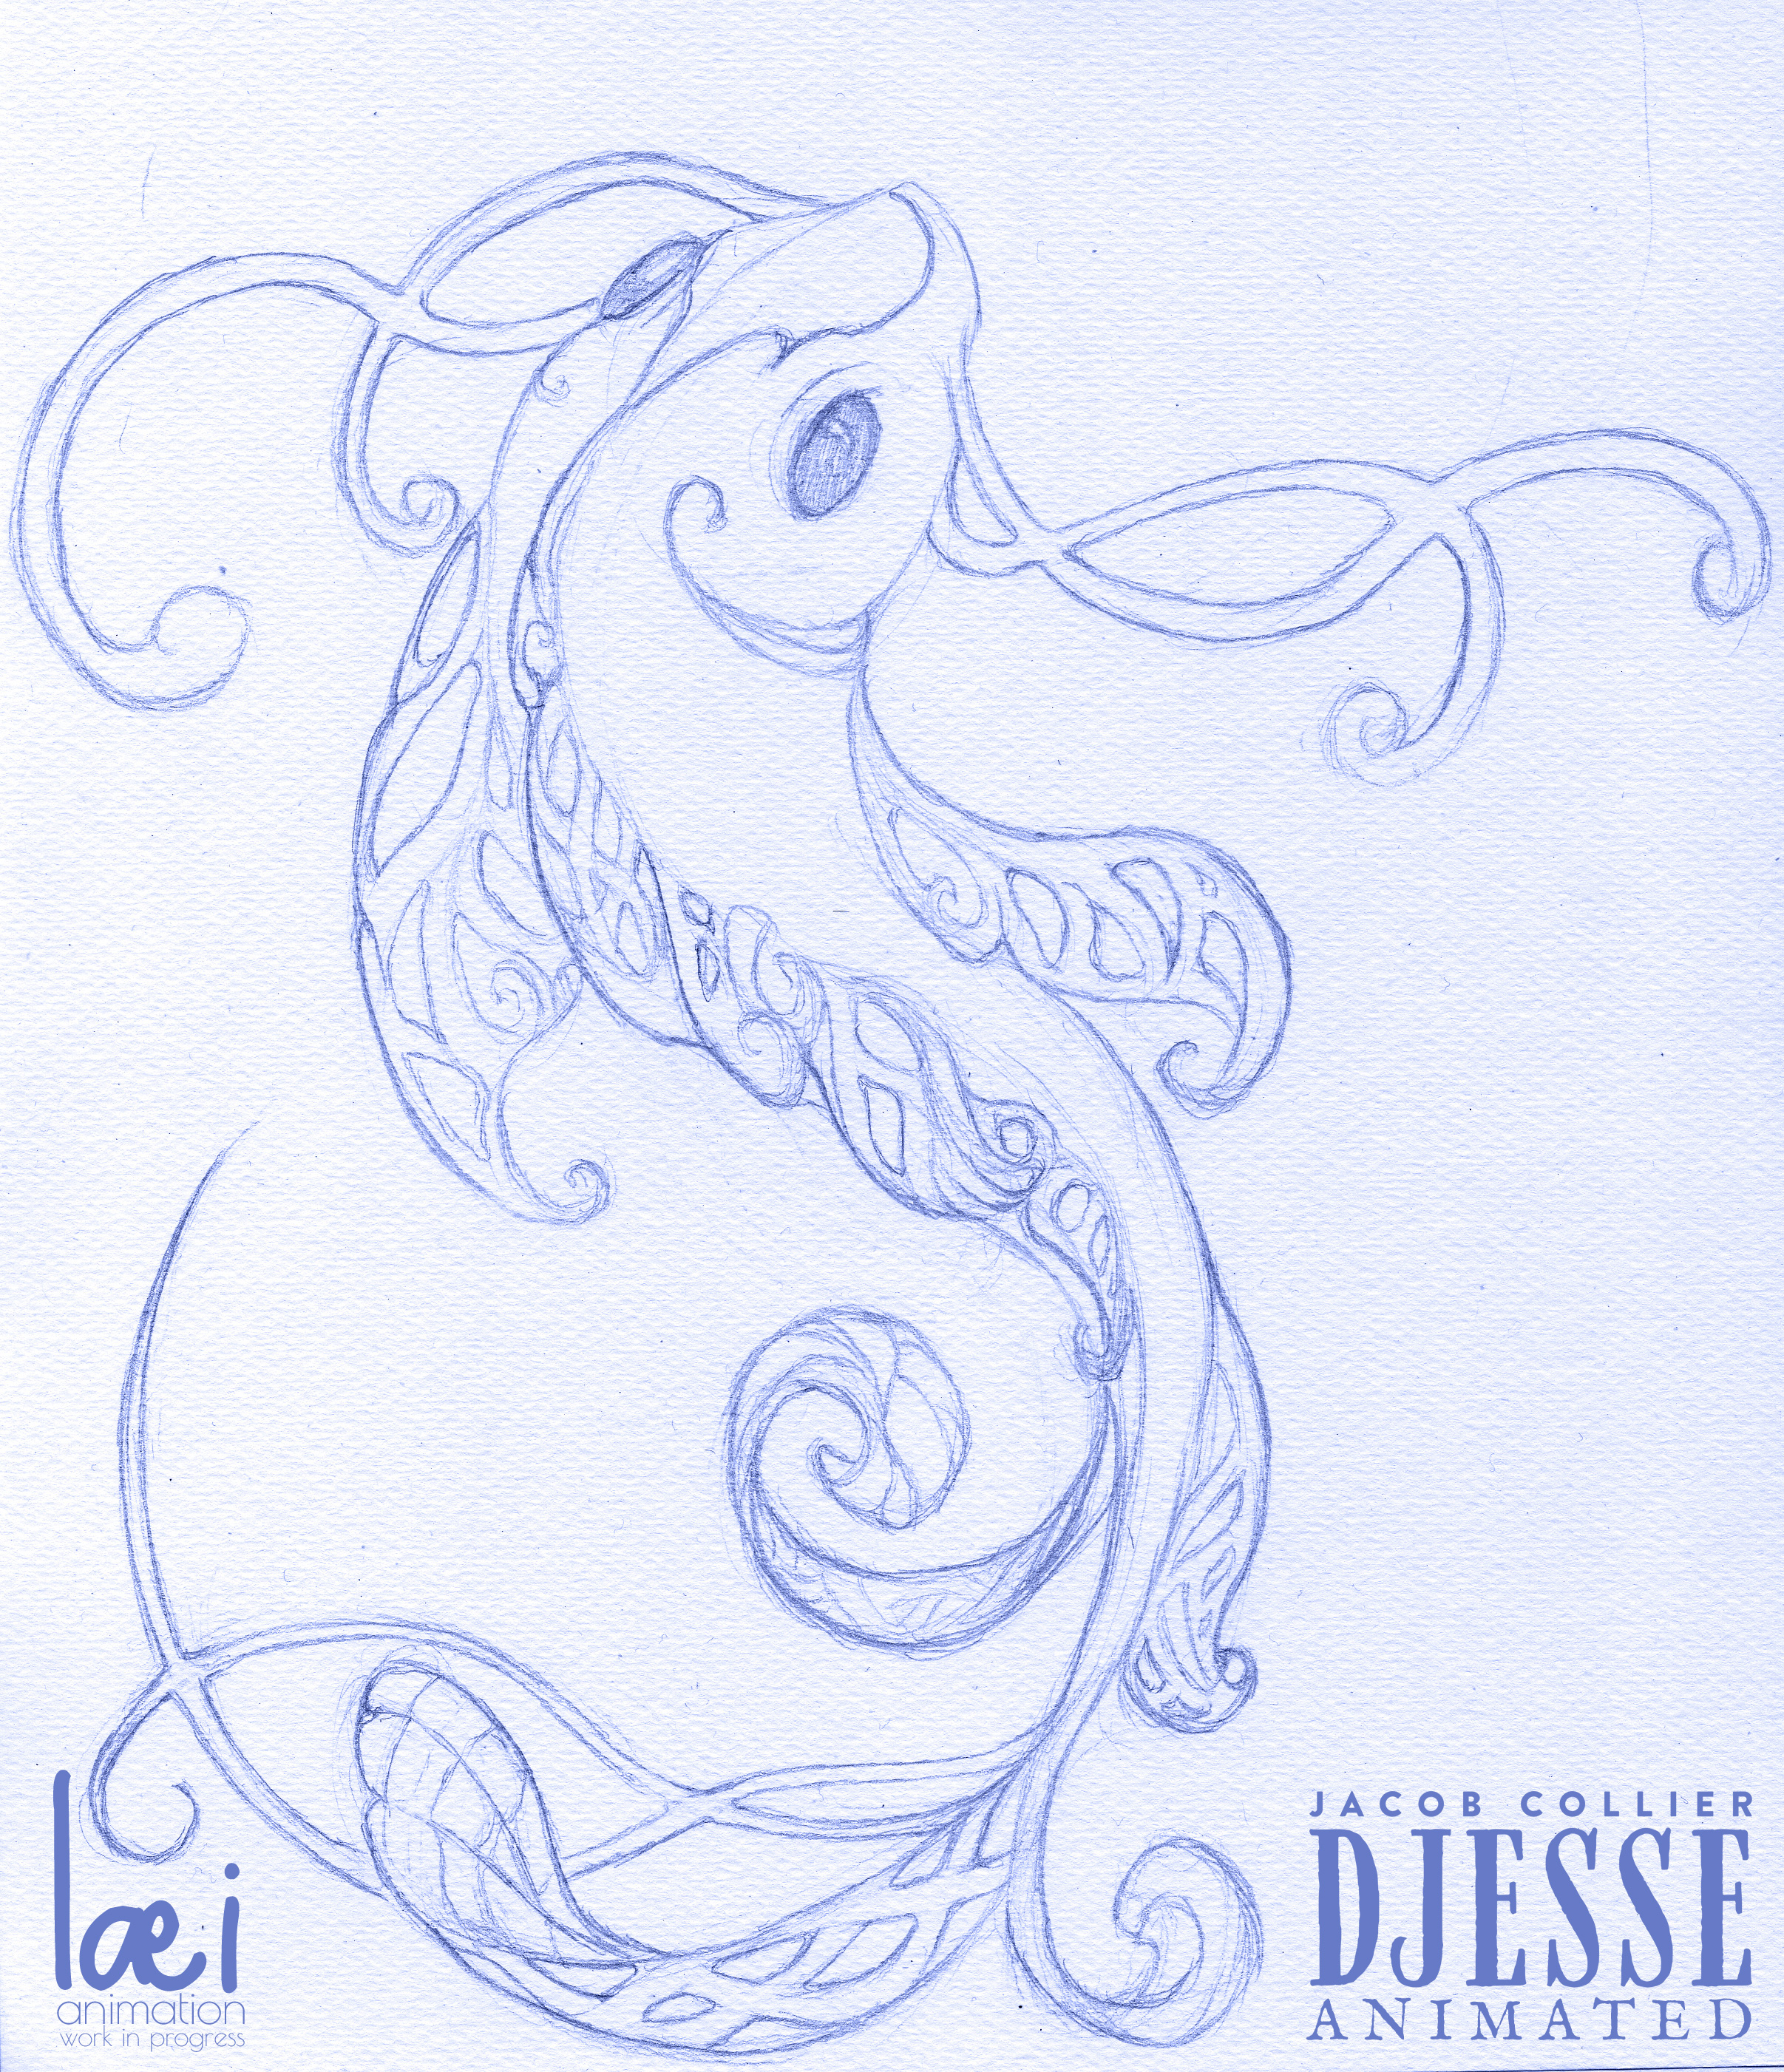 Pencil drawing of Laura's Koi fish design on her coat in an art-nouveau style